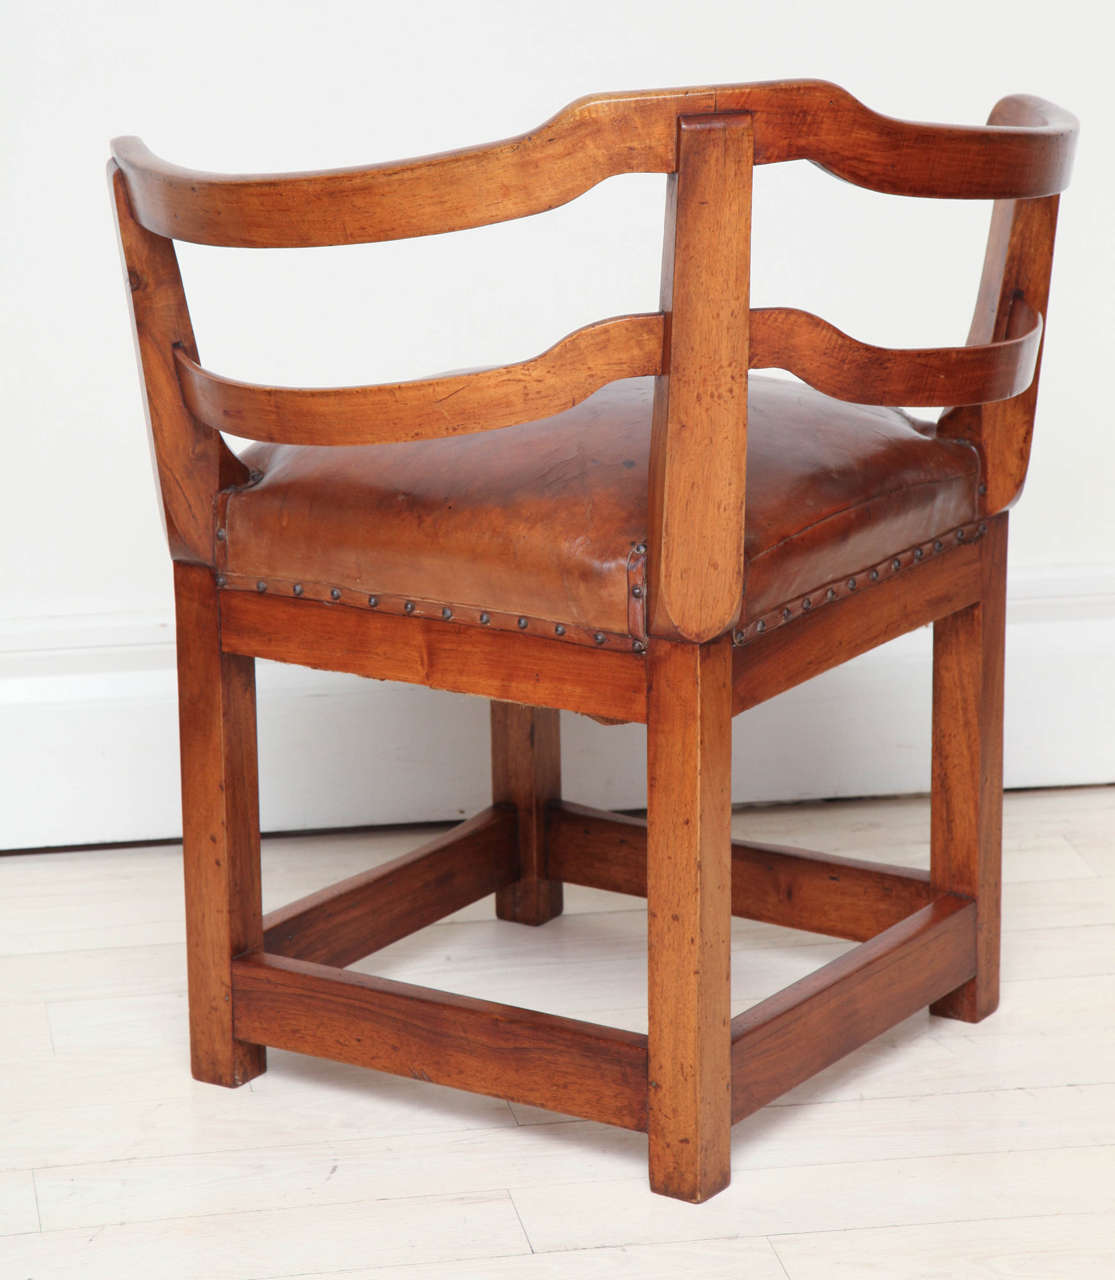 Early 19th Century French Walnut Corner Chair with Original Leather Seat 6